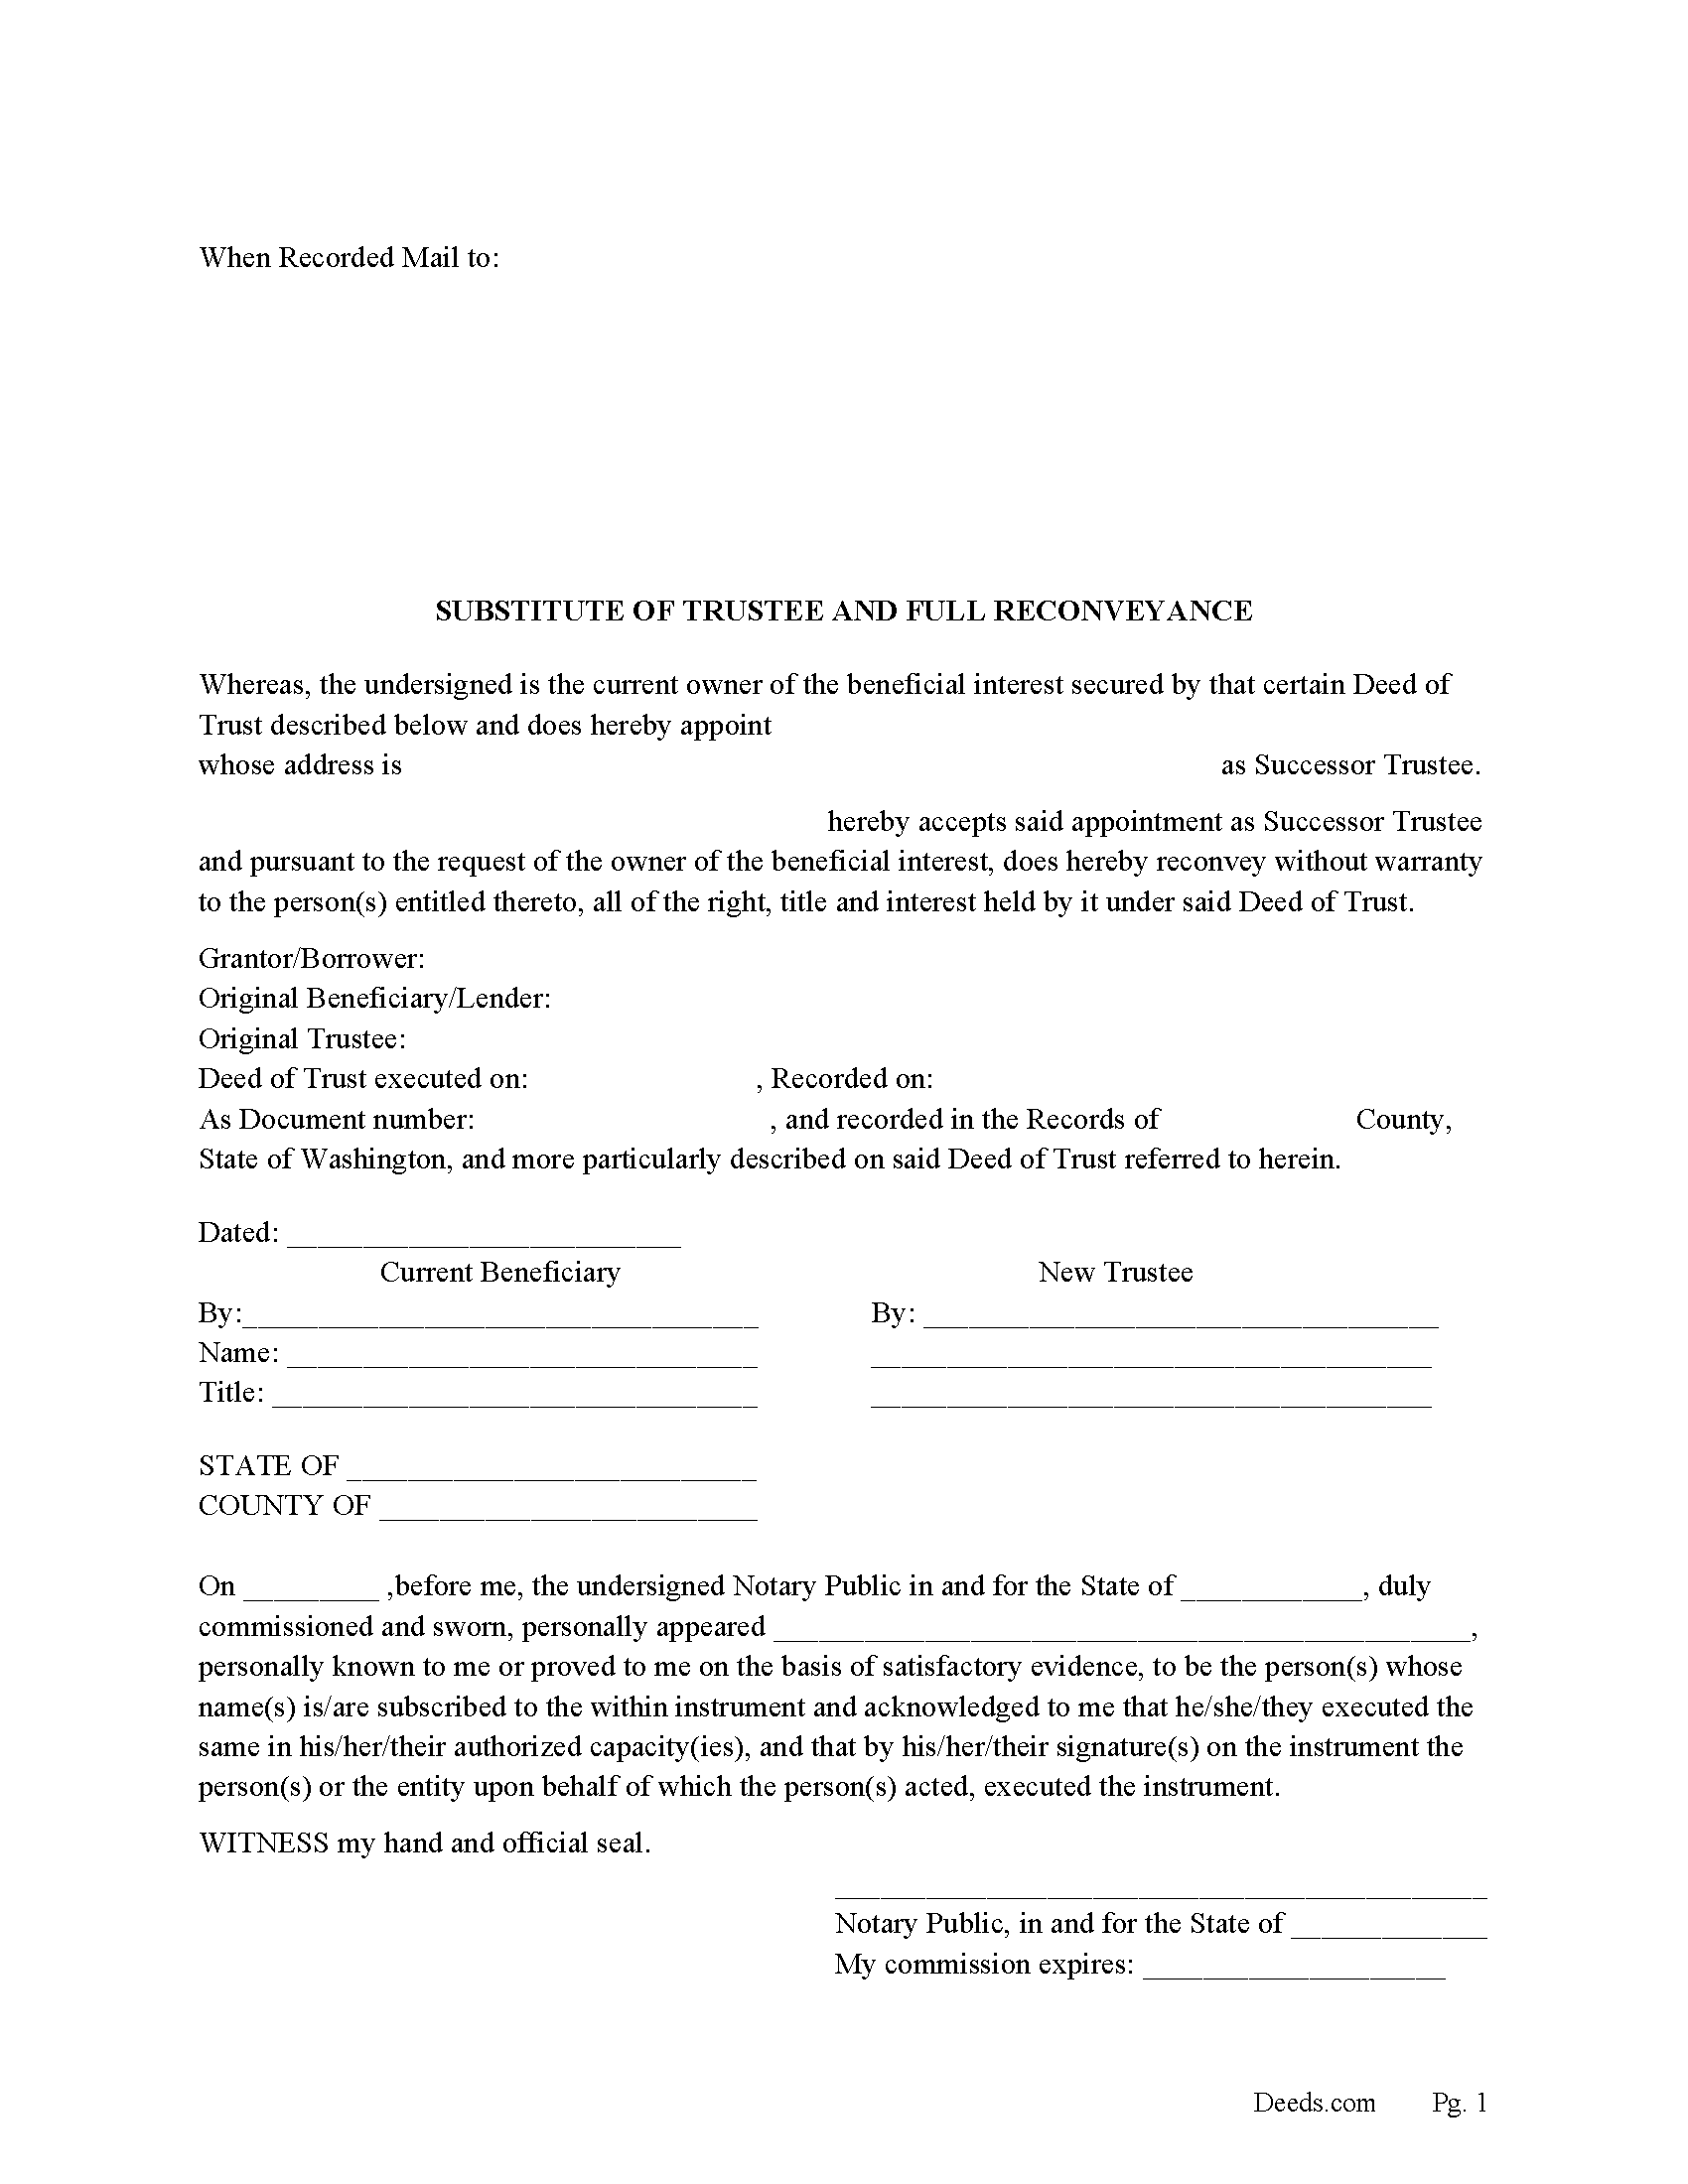 Substitution of Trustee and Full Reconveyance Form